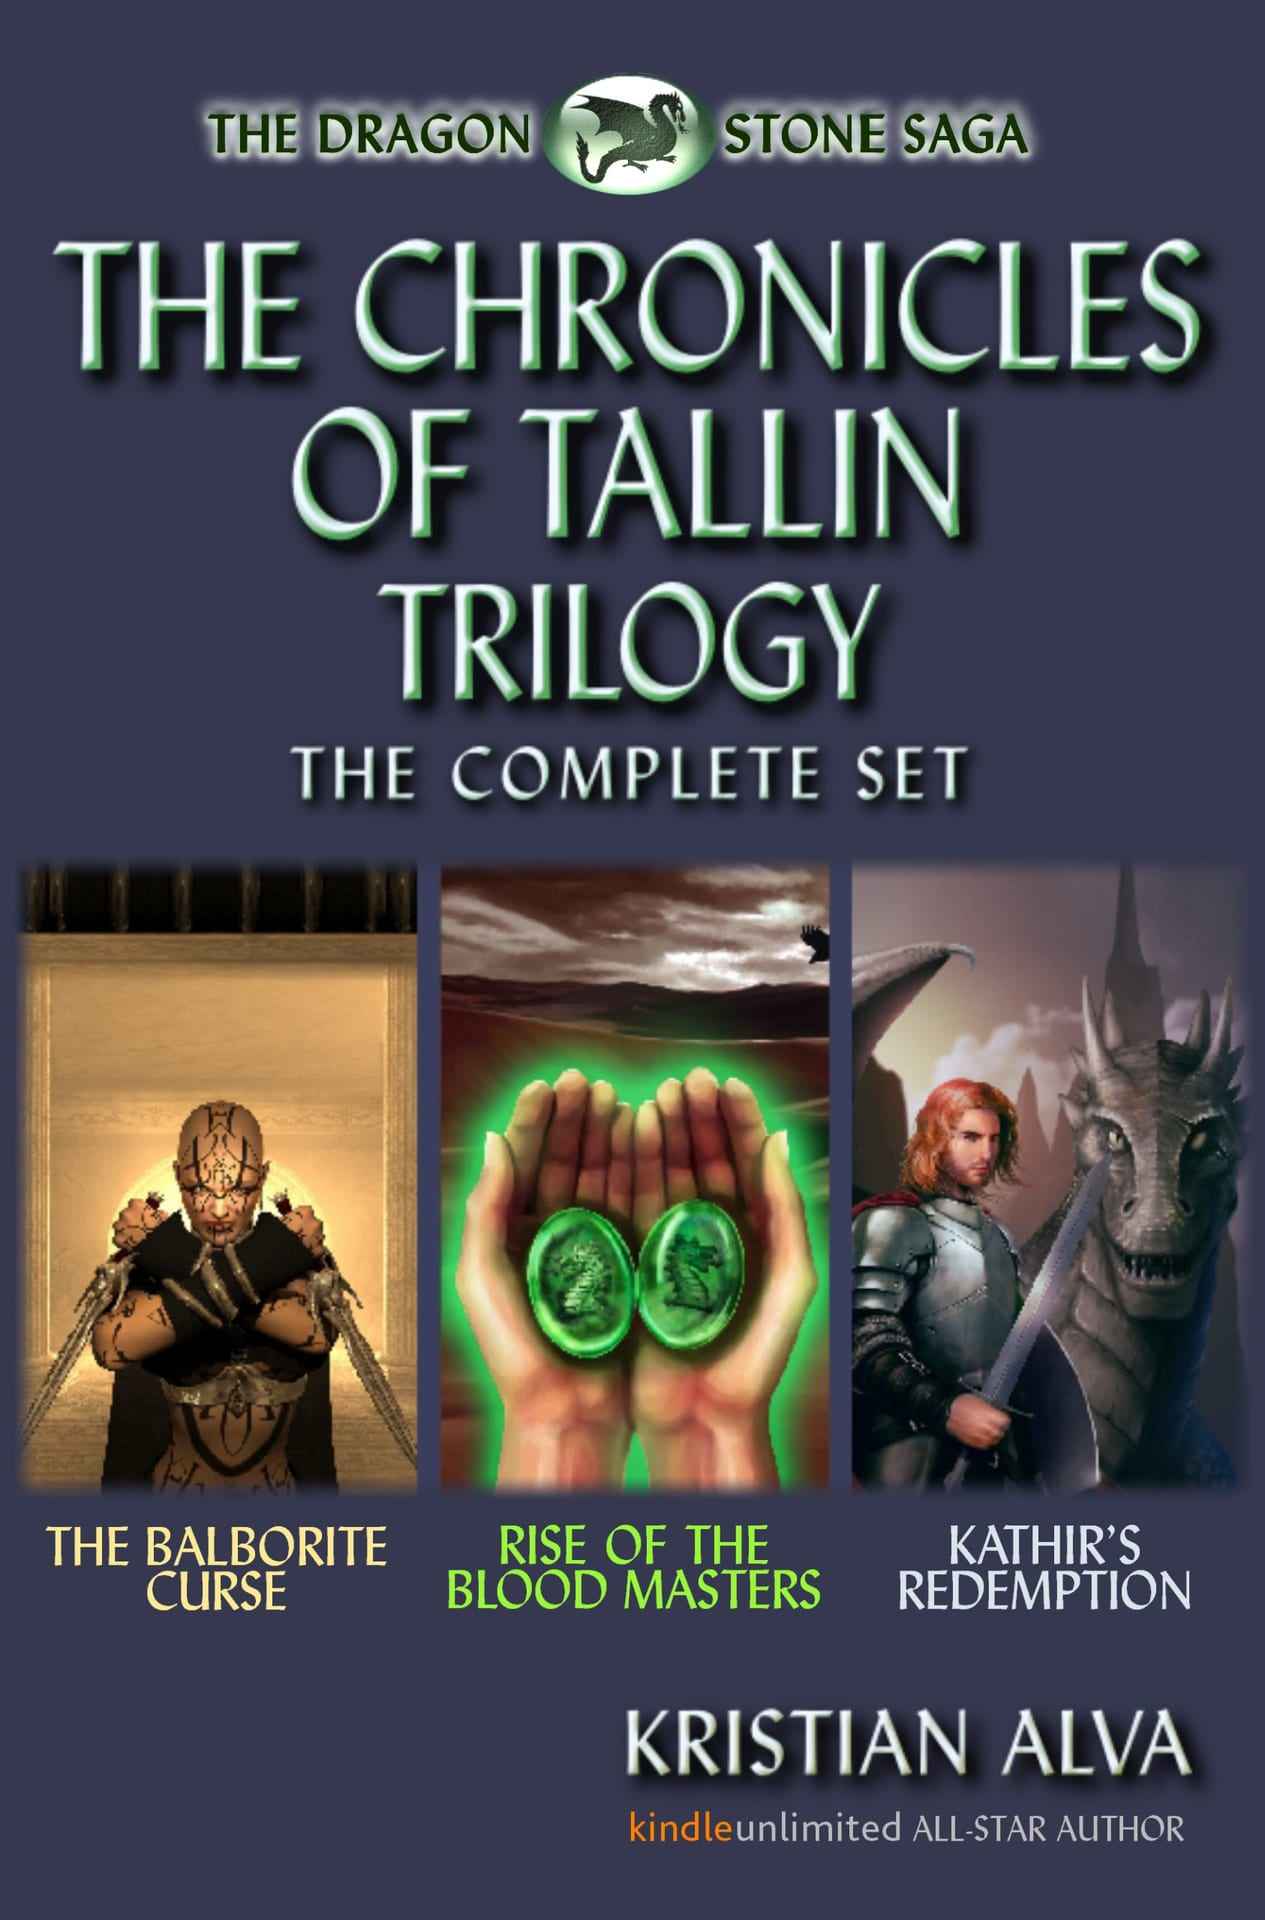 The Complete Chronicles of Tallin Trilogy: The Balborite Curse, Rise of the Blood Masters, Kathir’s Redemption